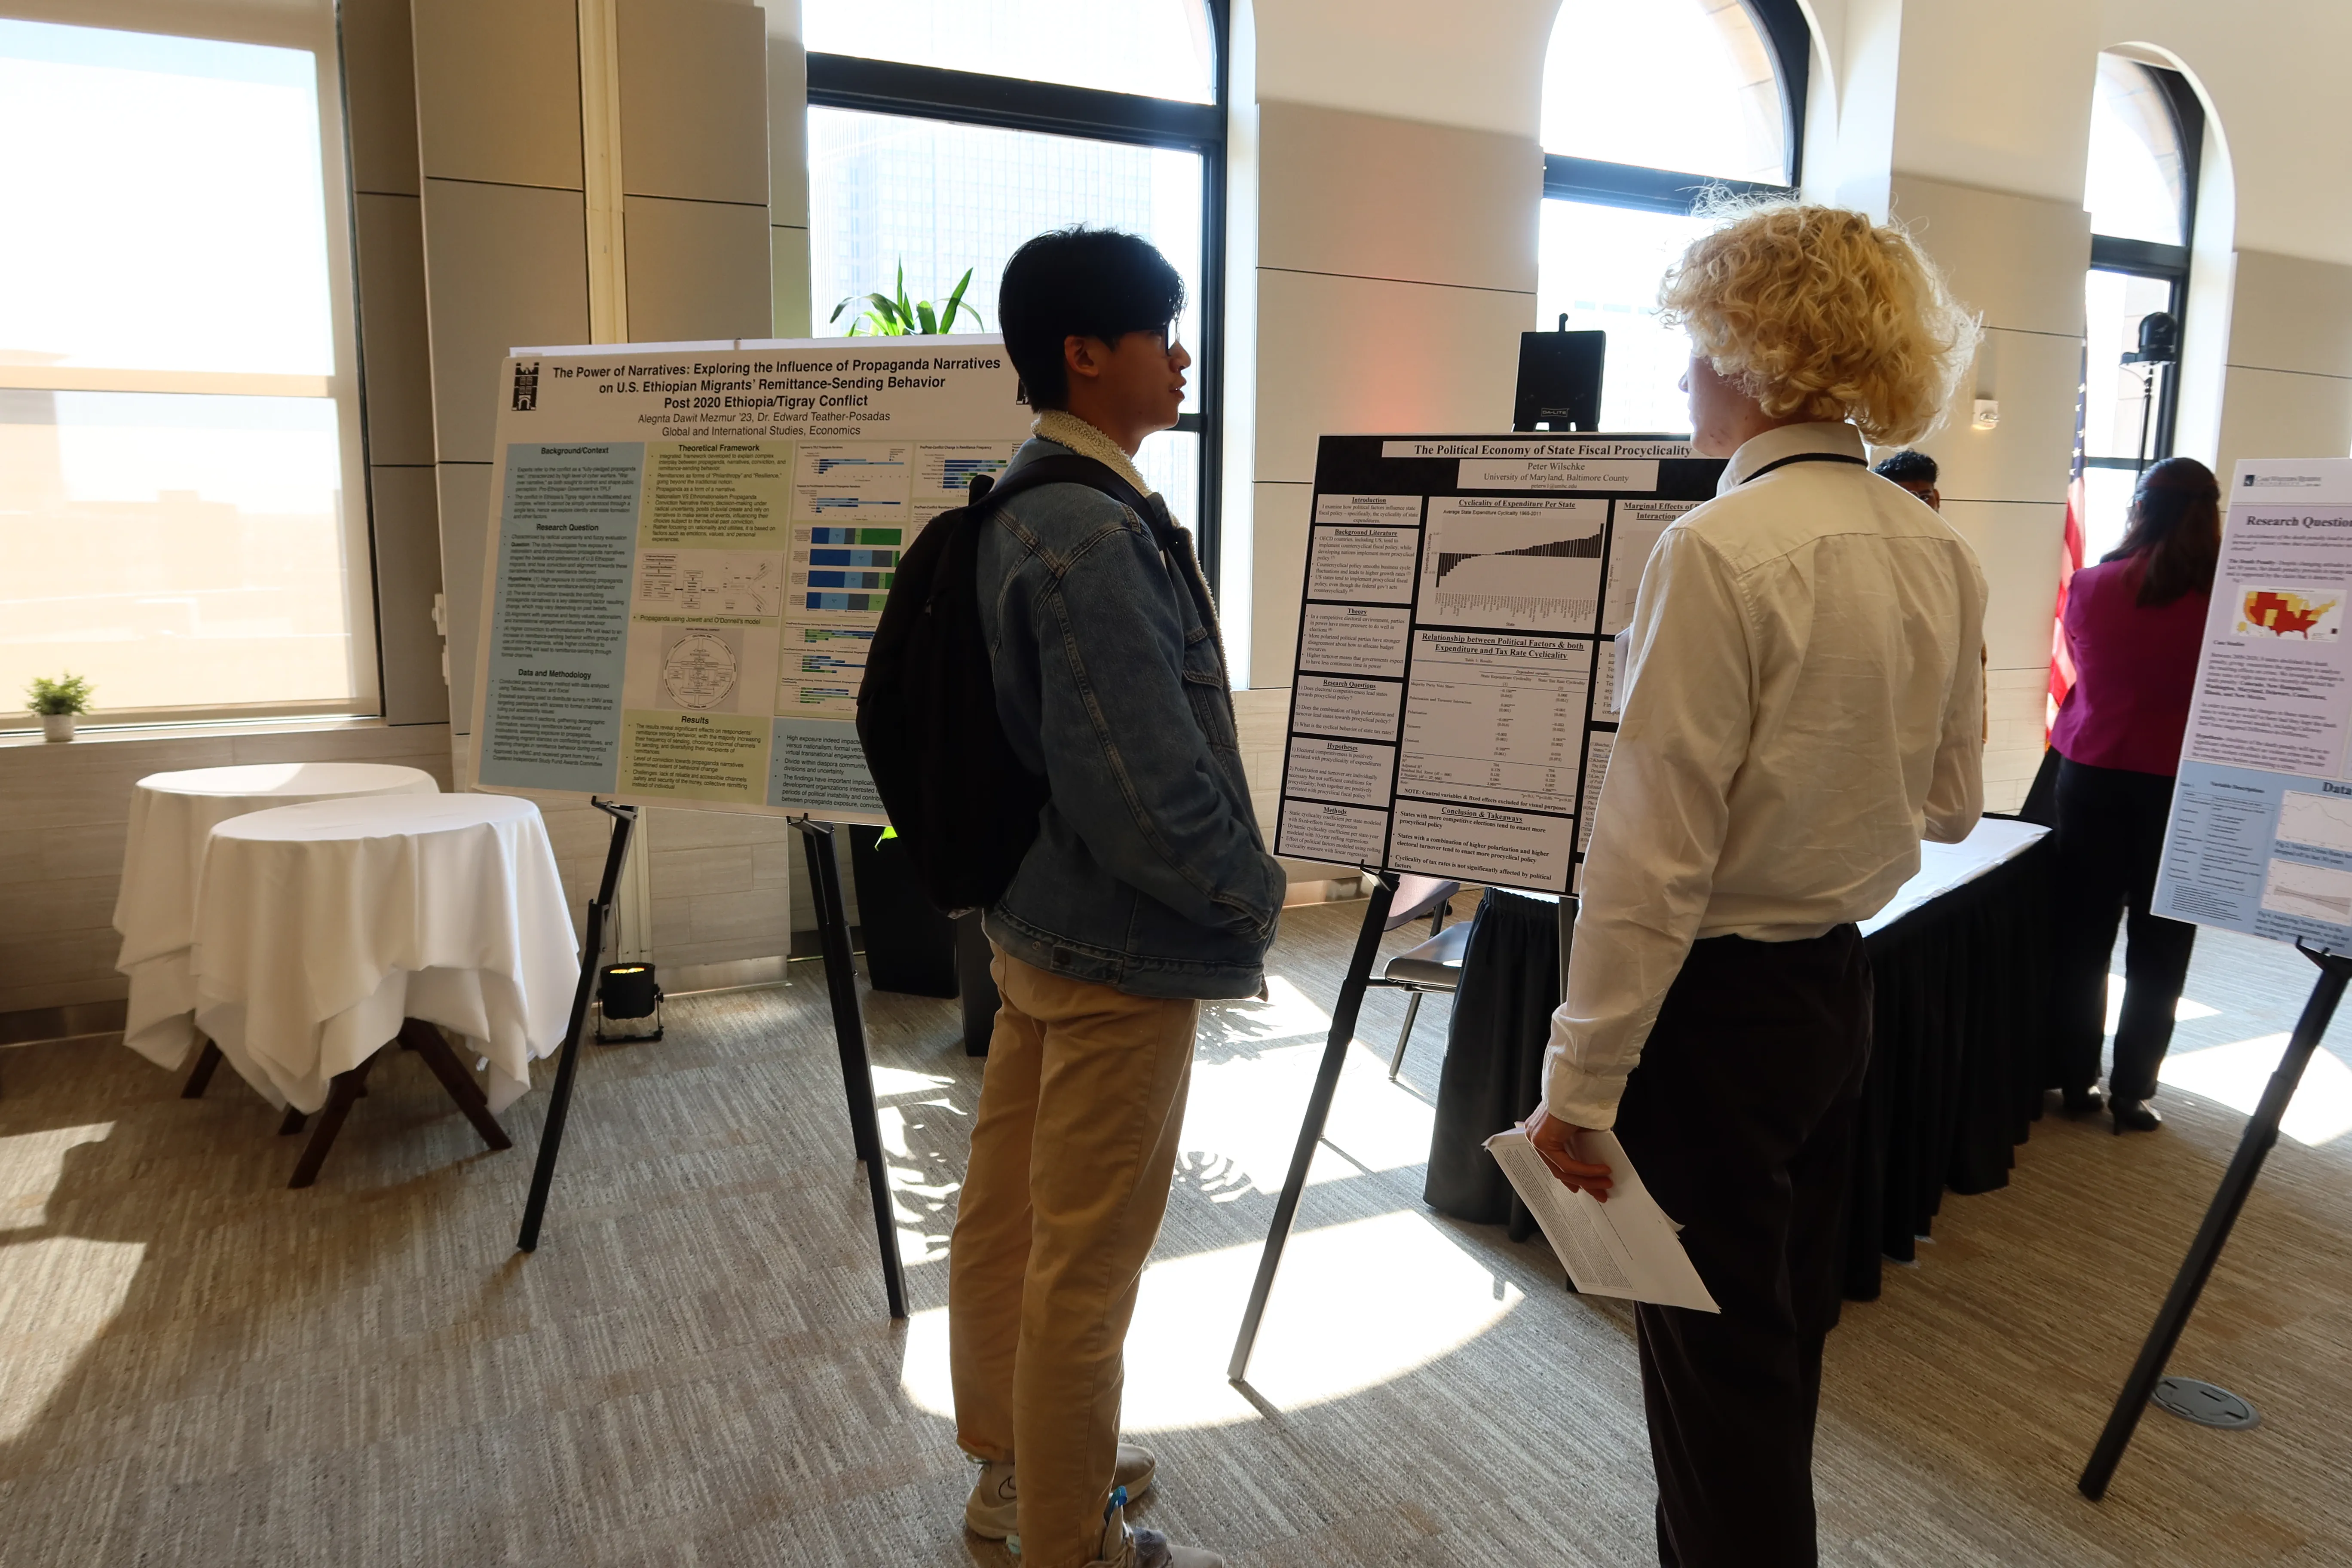 Two students discussing a poster presentation